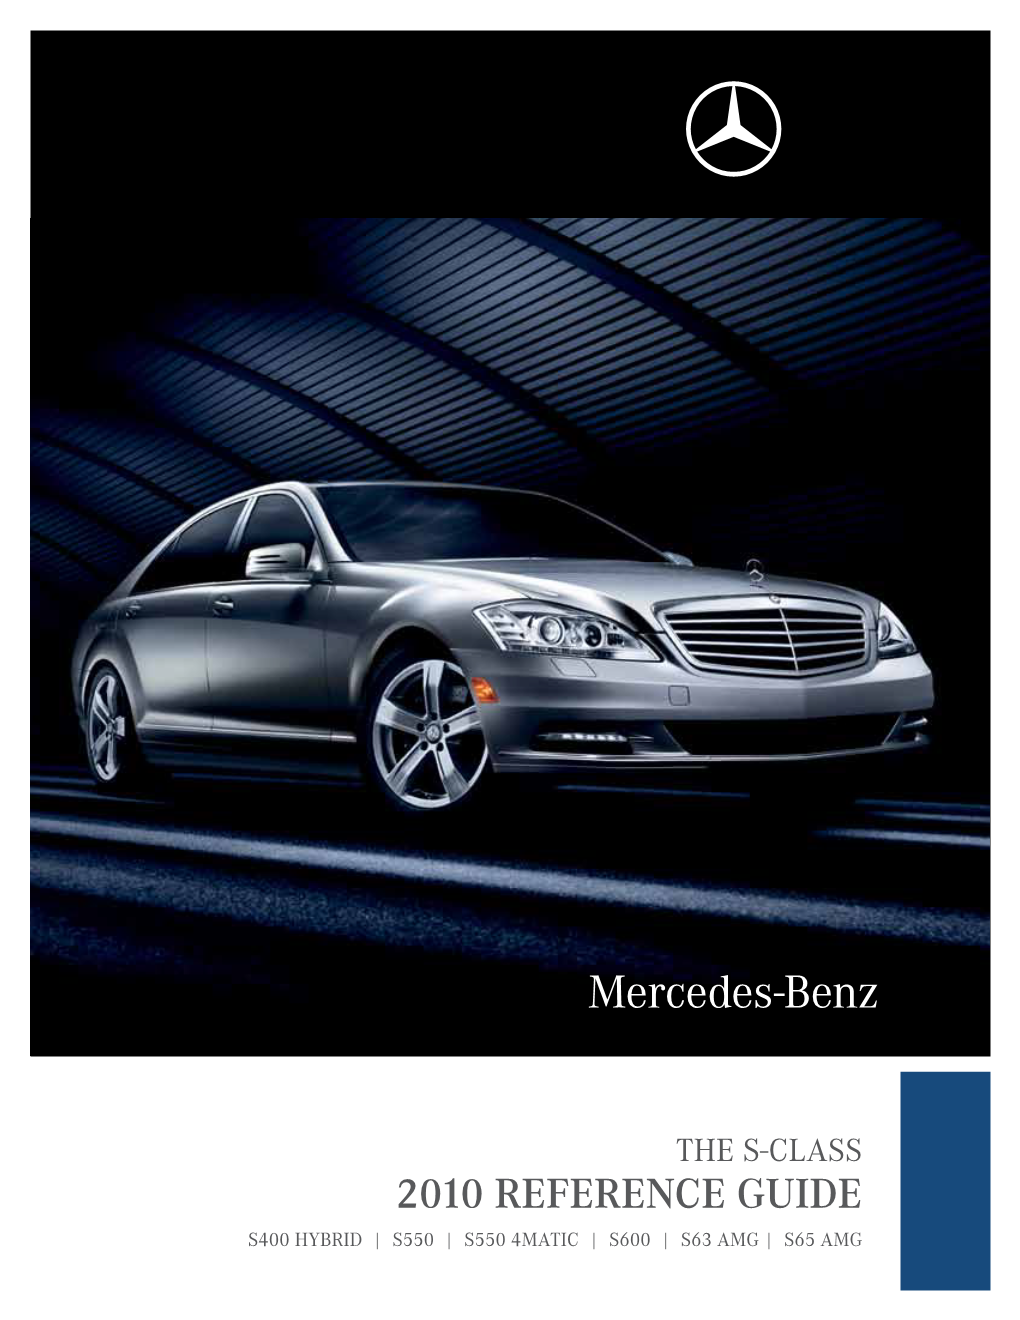 2010 Reference Guide S400 Hybrid | S550 | S550 4Matic | S600 | S63 Amg | S65 Amg Last Updated July 09, 2009 2010 S-Class | Model Range & Model Year Highlights